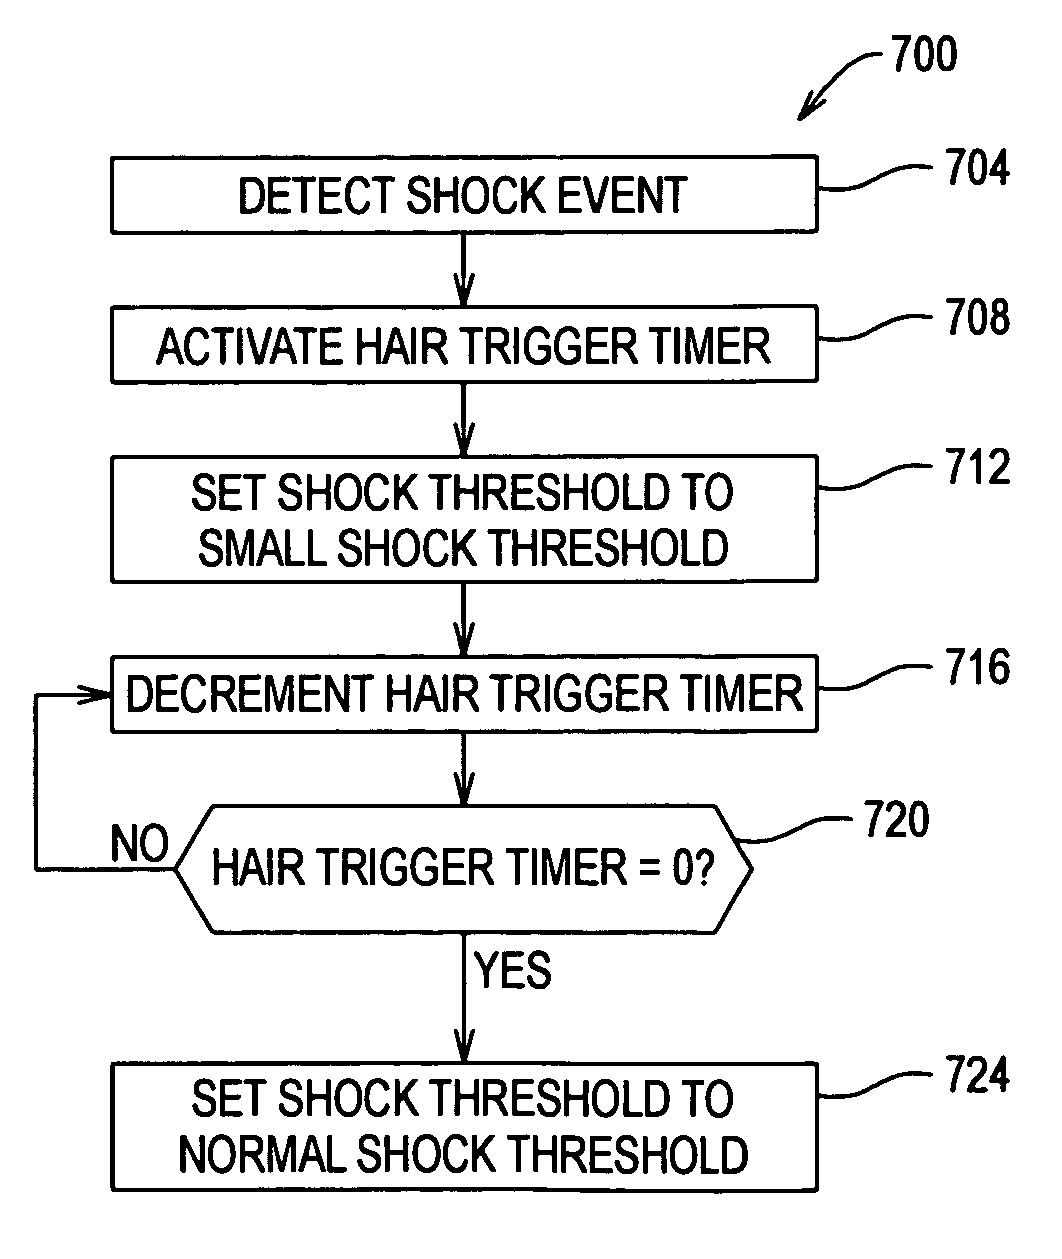 Dynamic shock detection in disk drive using hair trigger timer